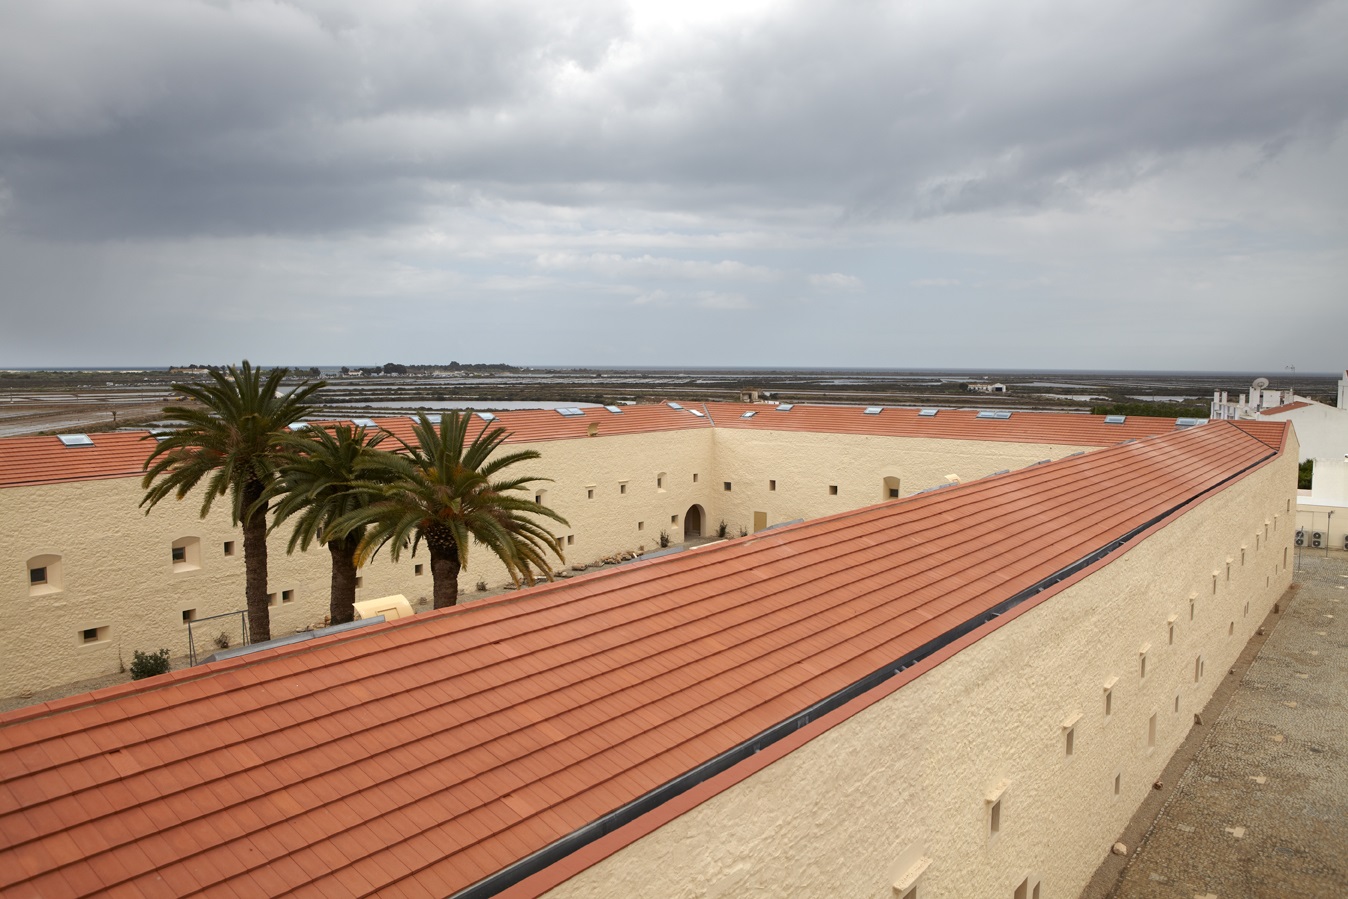 CS Plasma tiles on large low pitch roof of a convent in Portugal.